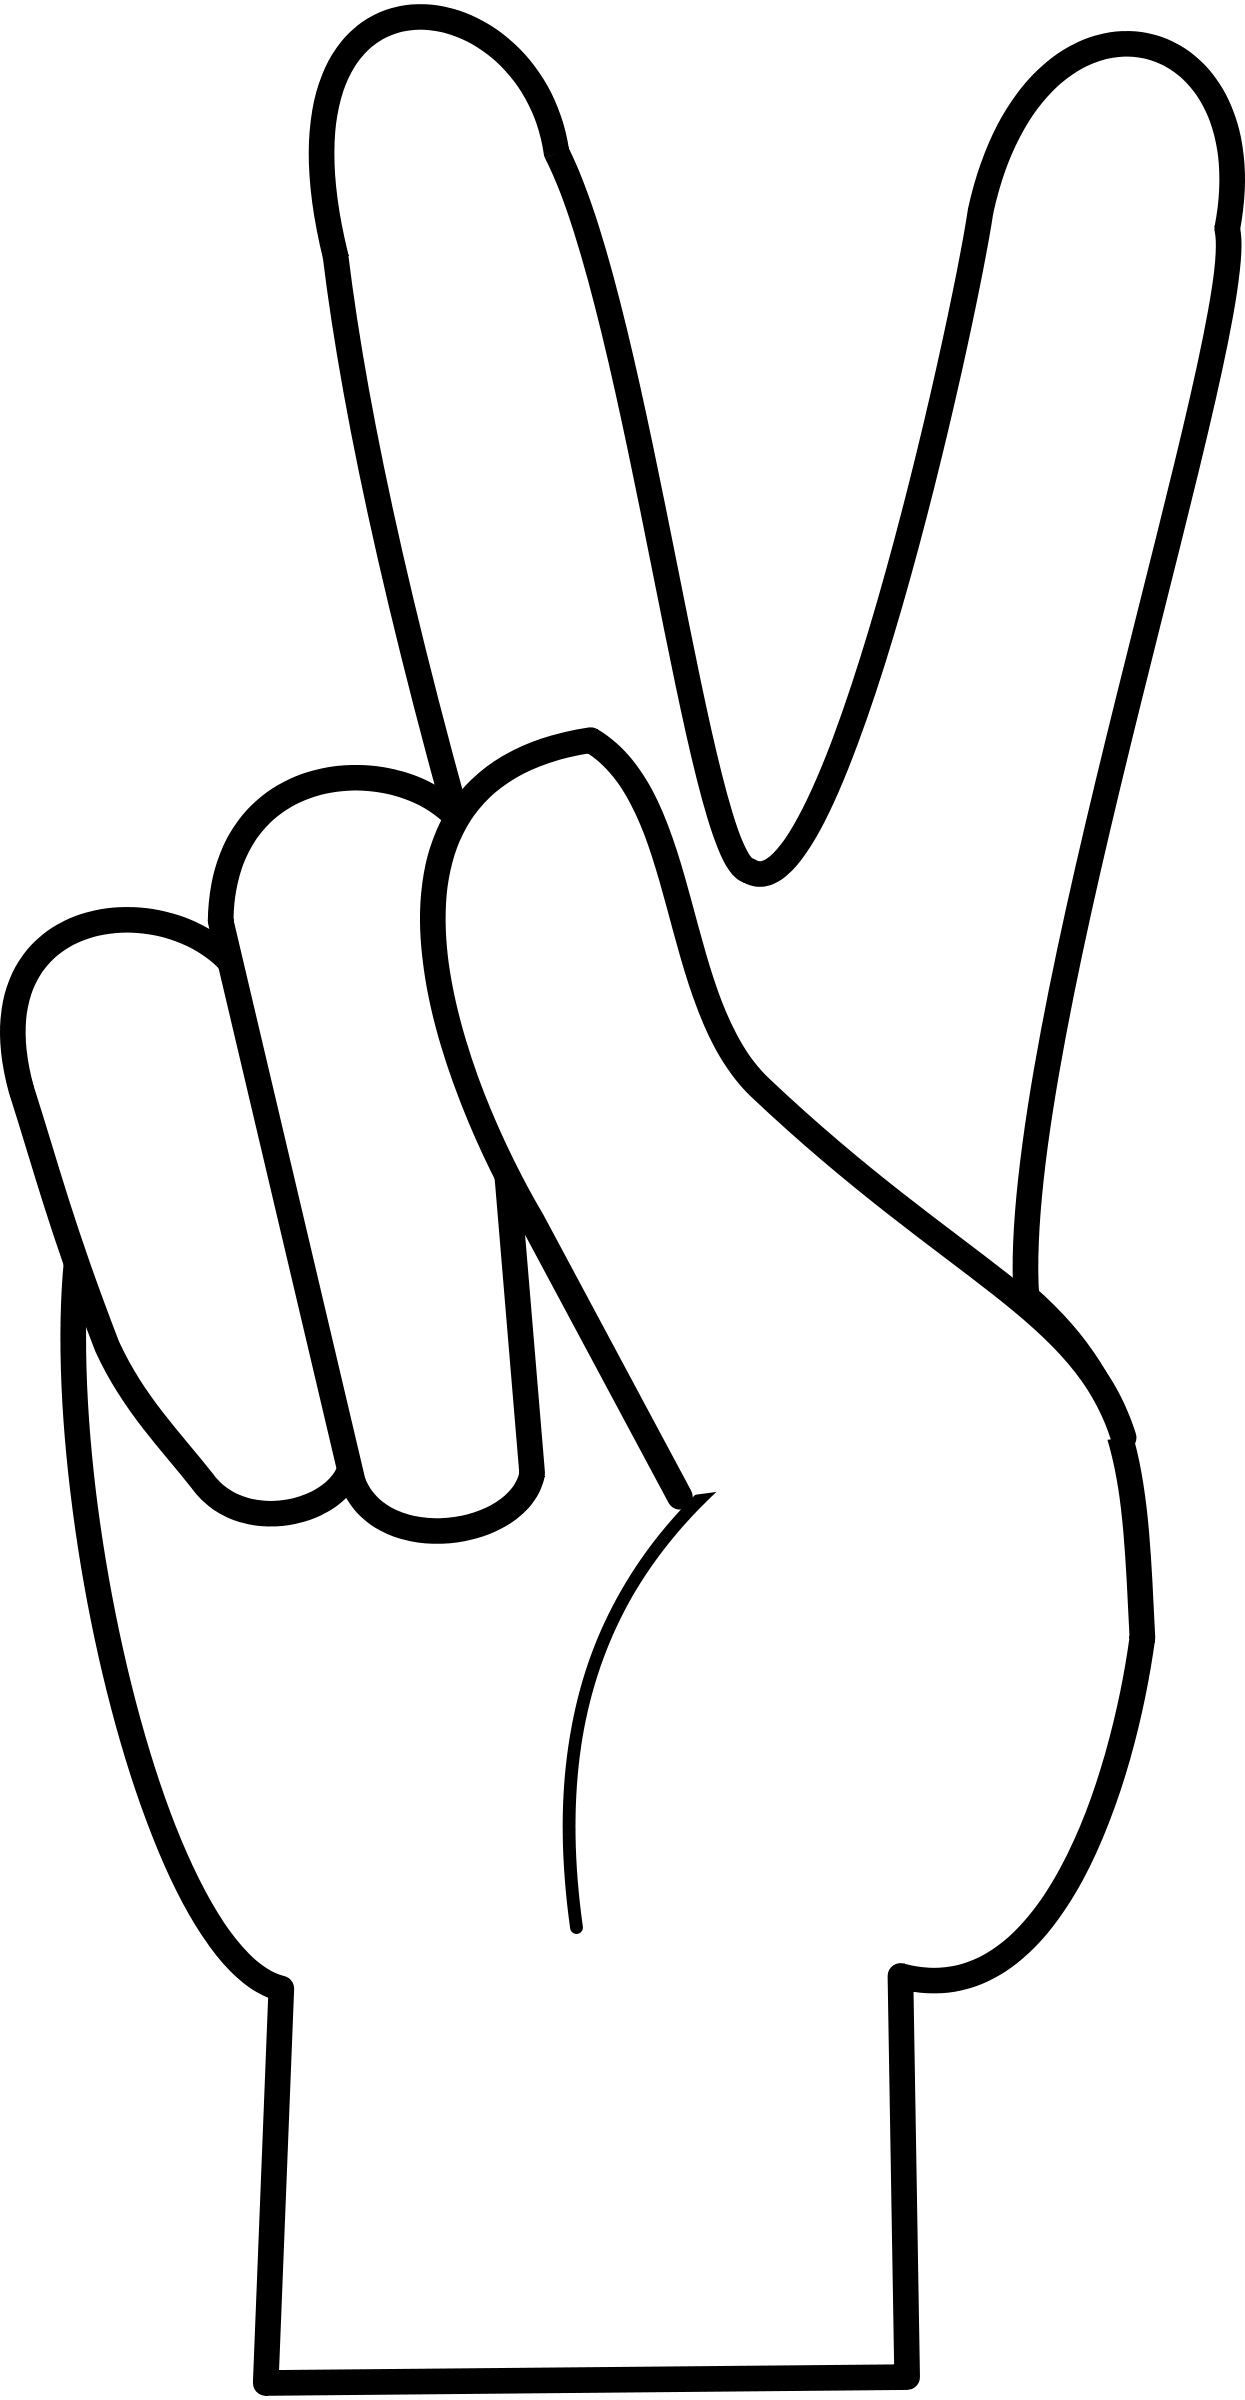 Hands clipart peace. Hand sign panda free